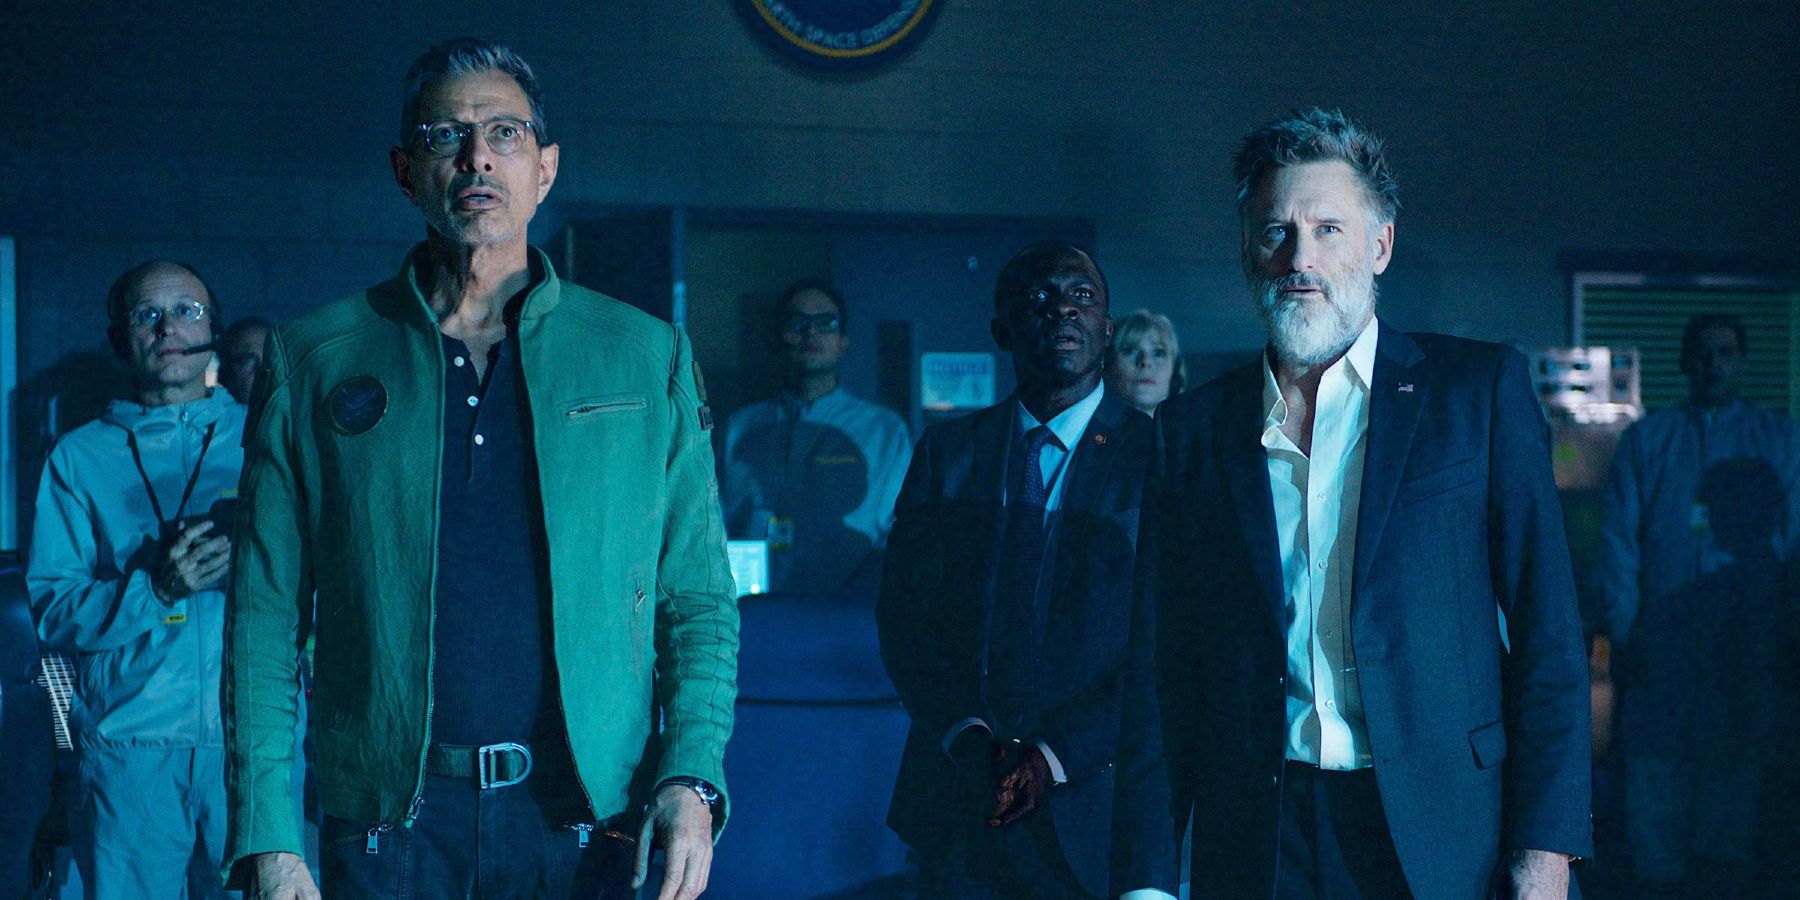 David And Will Staring In Shock - Independence Day: Resurgence